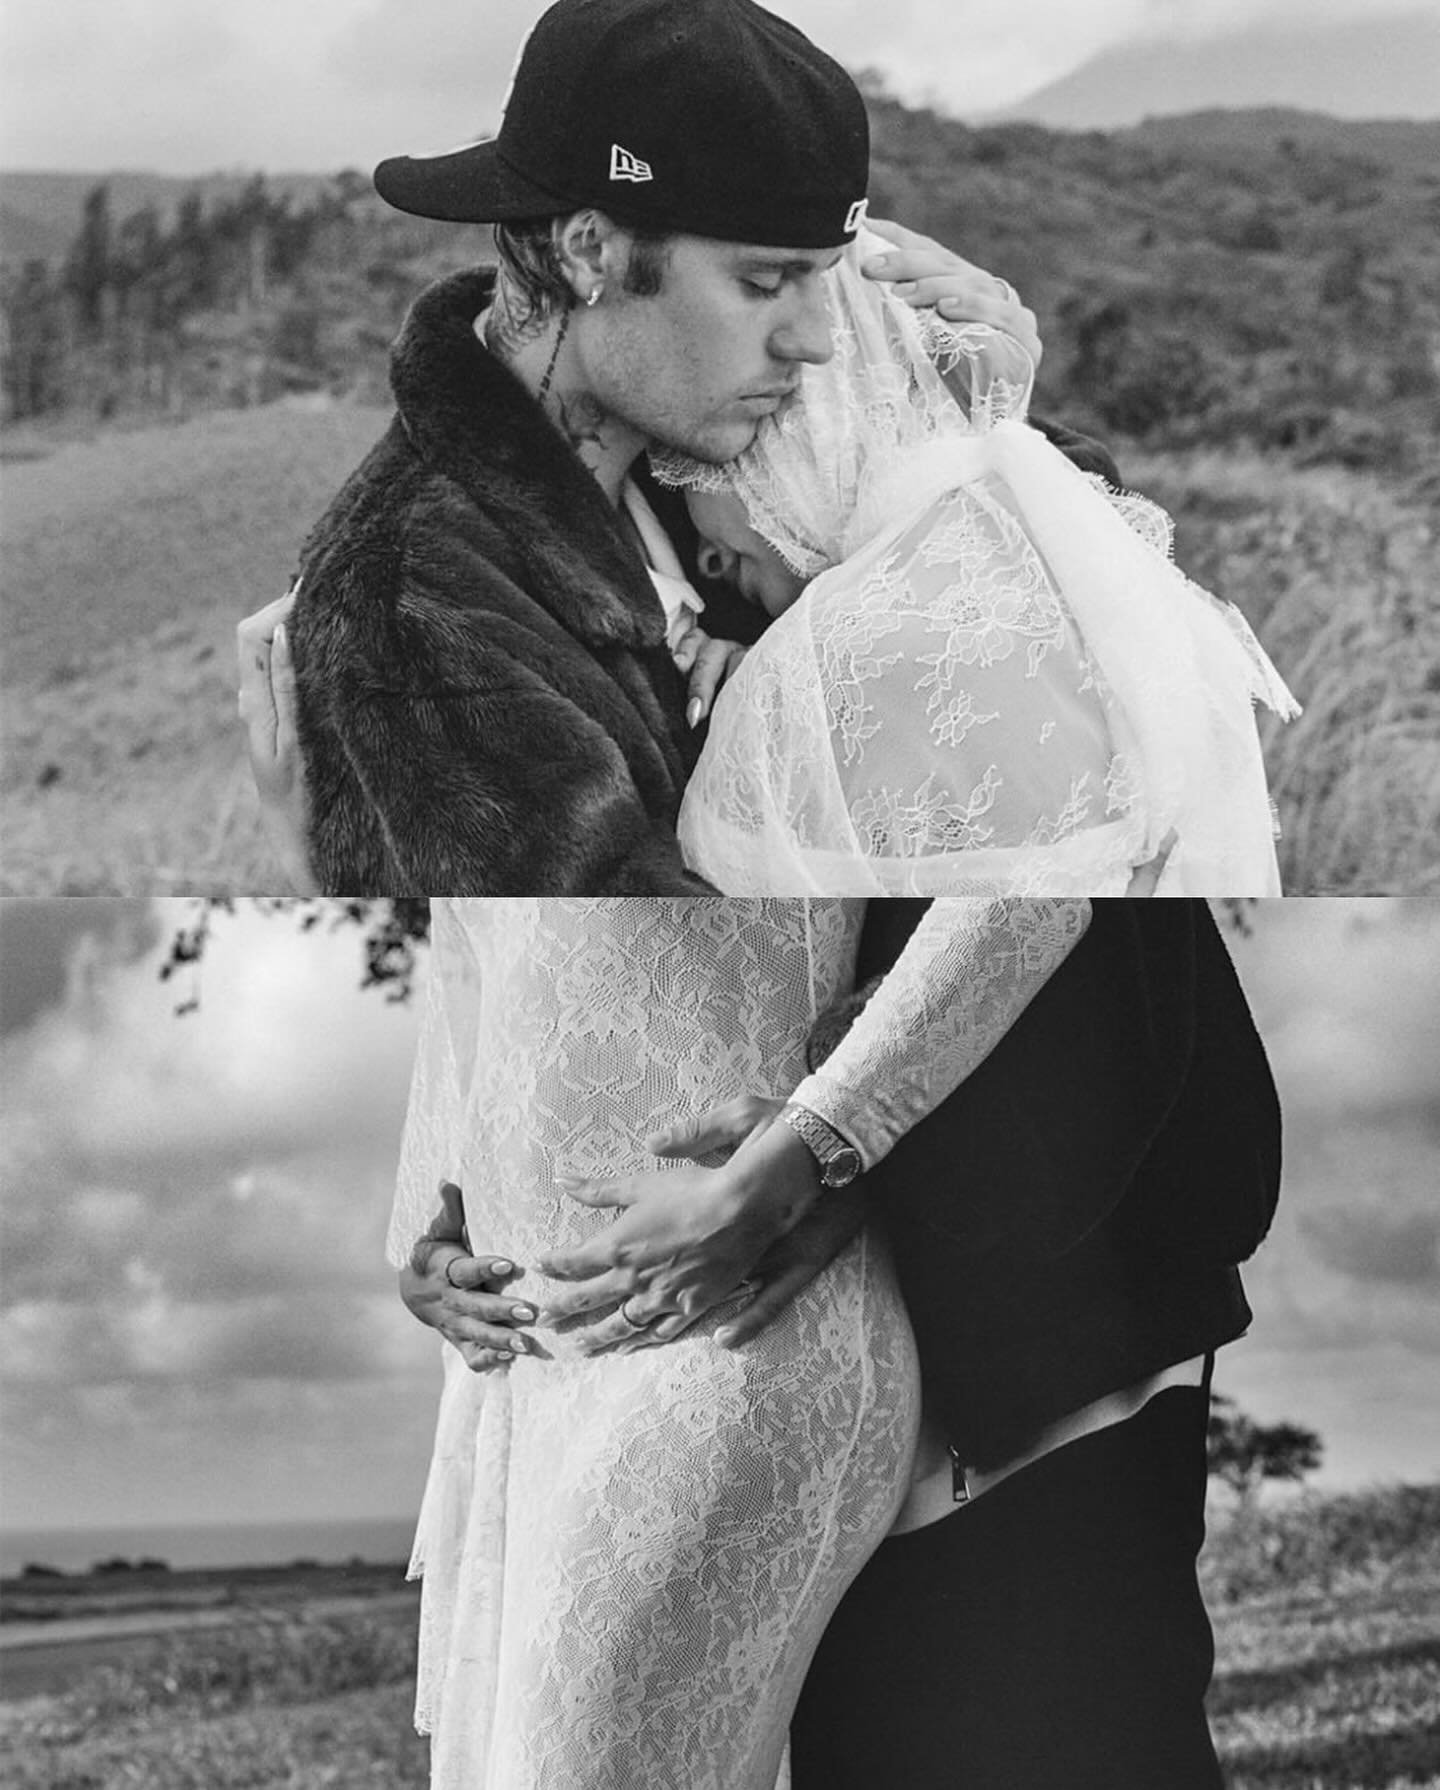 BABY BABY BABY OHHHHHH 😭🍼🤍 Justin and Hailey announced they are expecting their first child with a sweet video of them renewing their vows after 6 years of marriage! 

📸: @justinbieber &amp; @haileybieber via Instagram